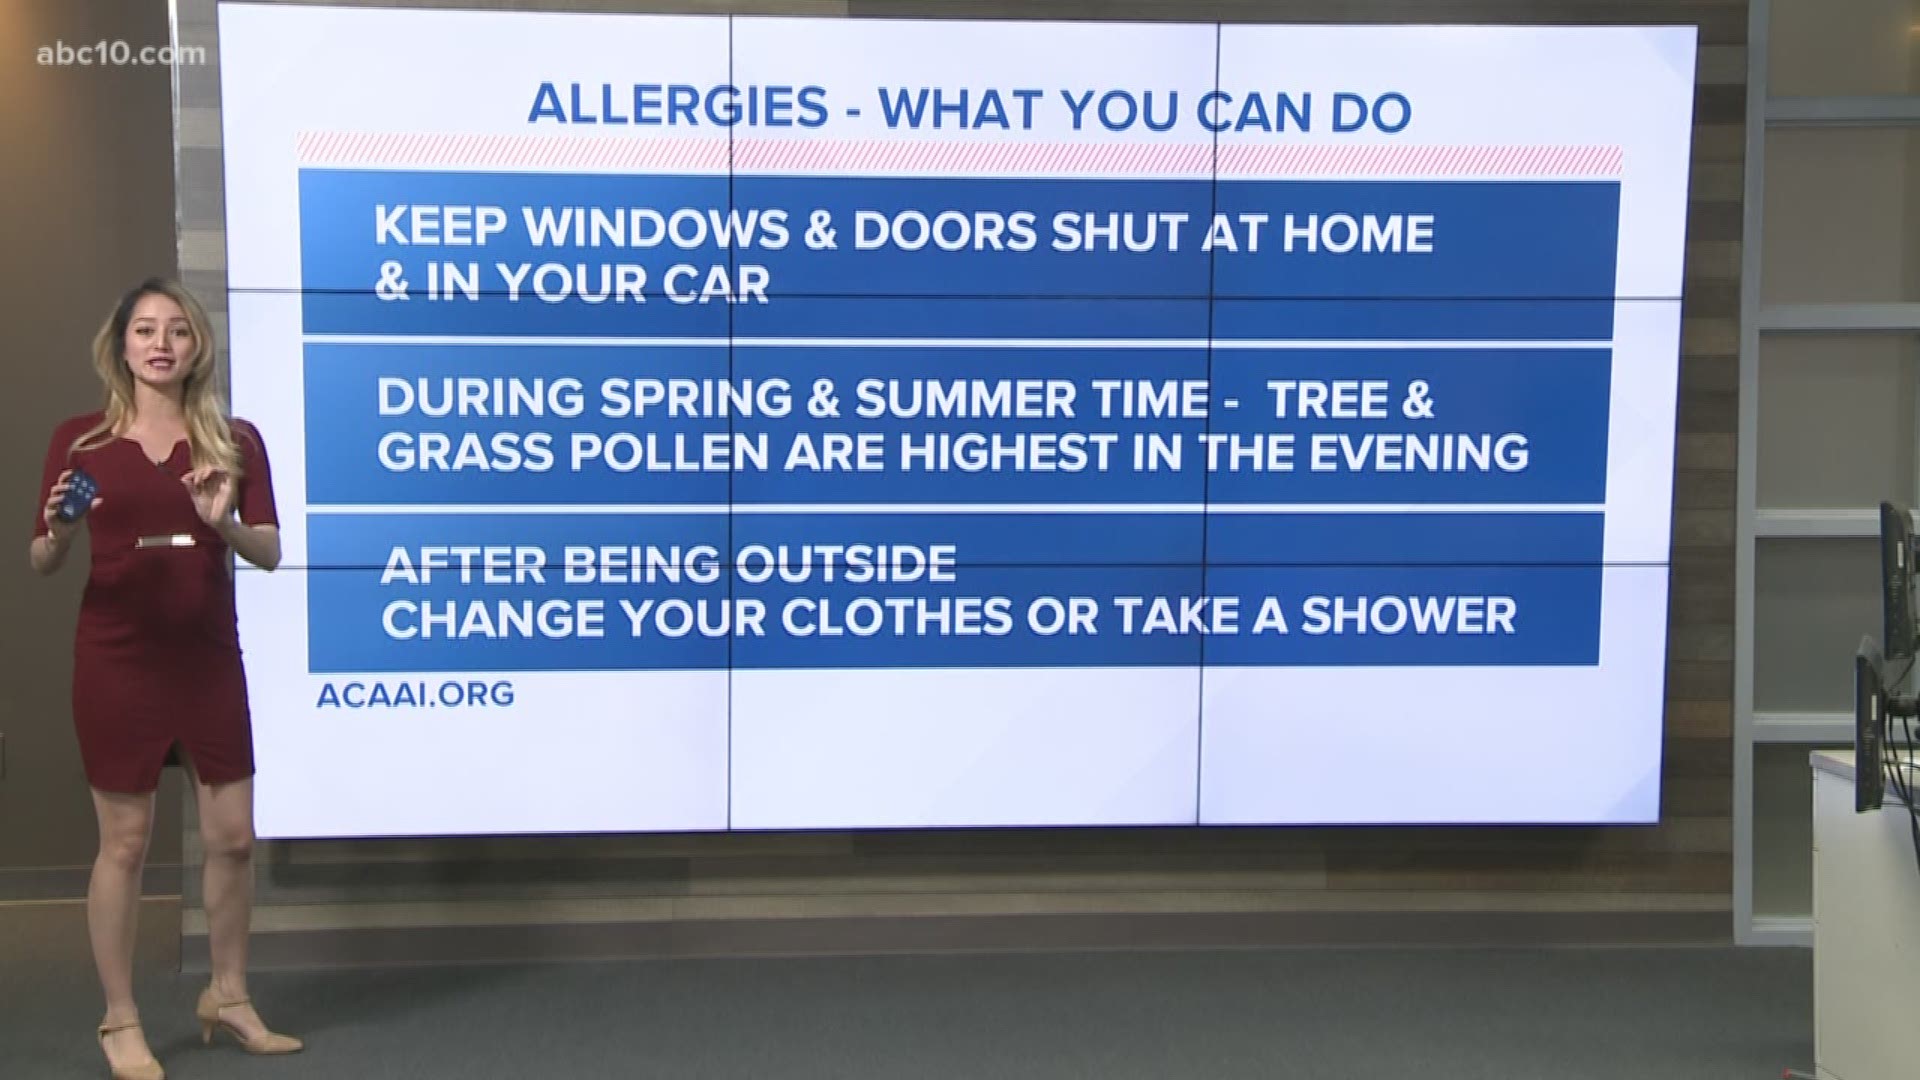 Allergies - How to alleviate symptoms without medication